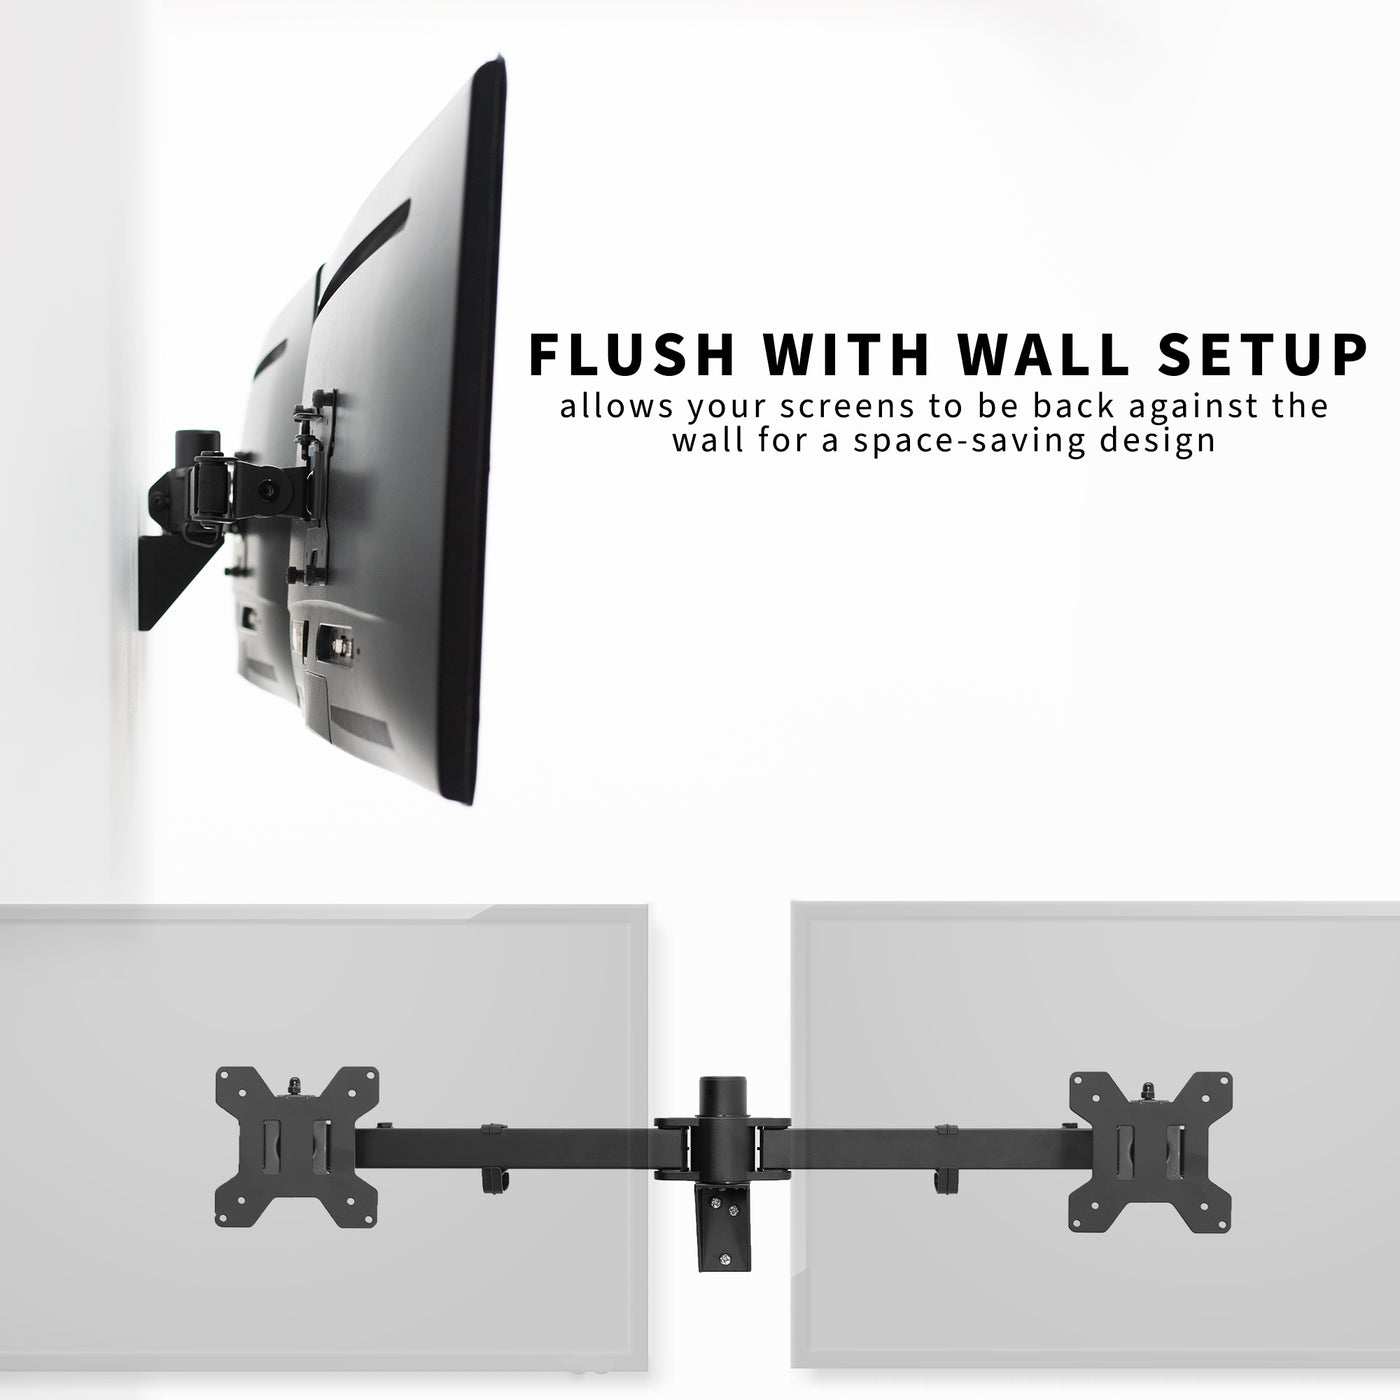 This wall mount runs flush to the wall for a sleek modern look.